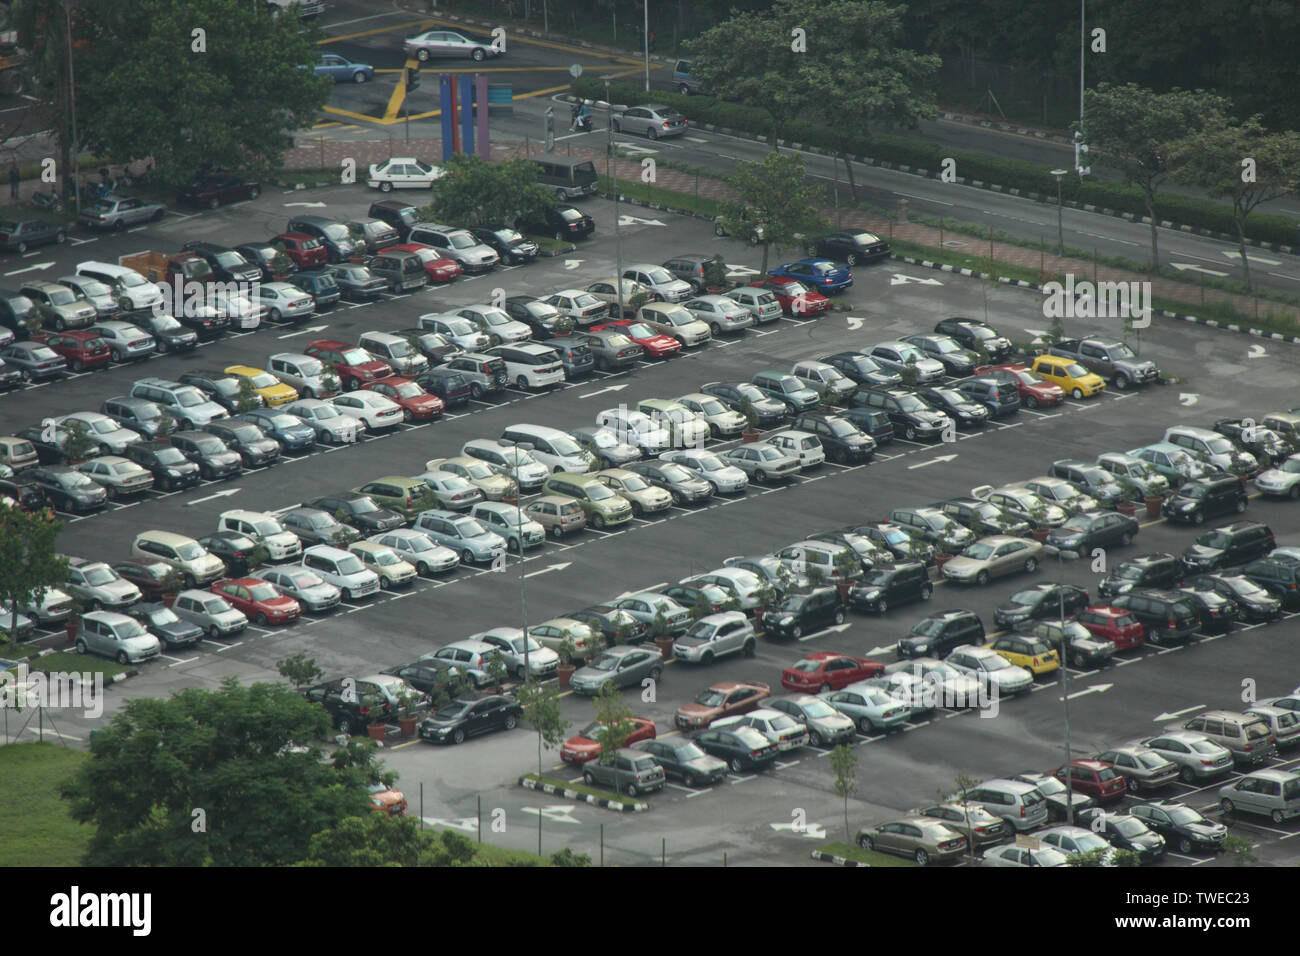 High angle view of cars parked in a parking lot Stock Photo